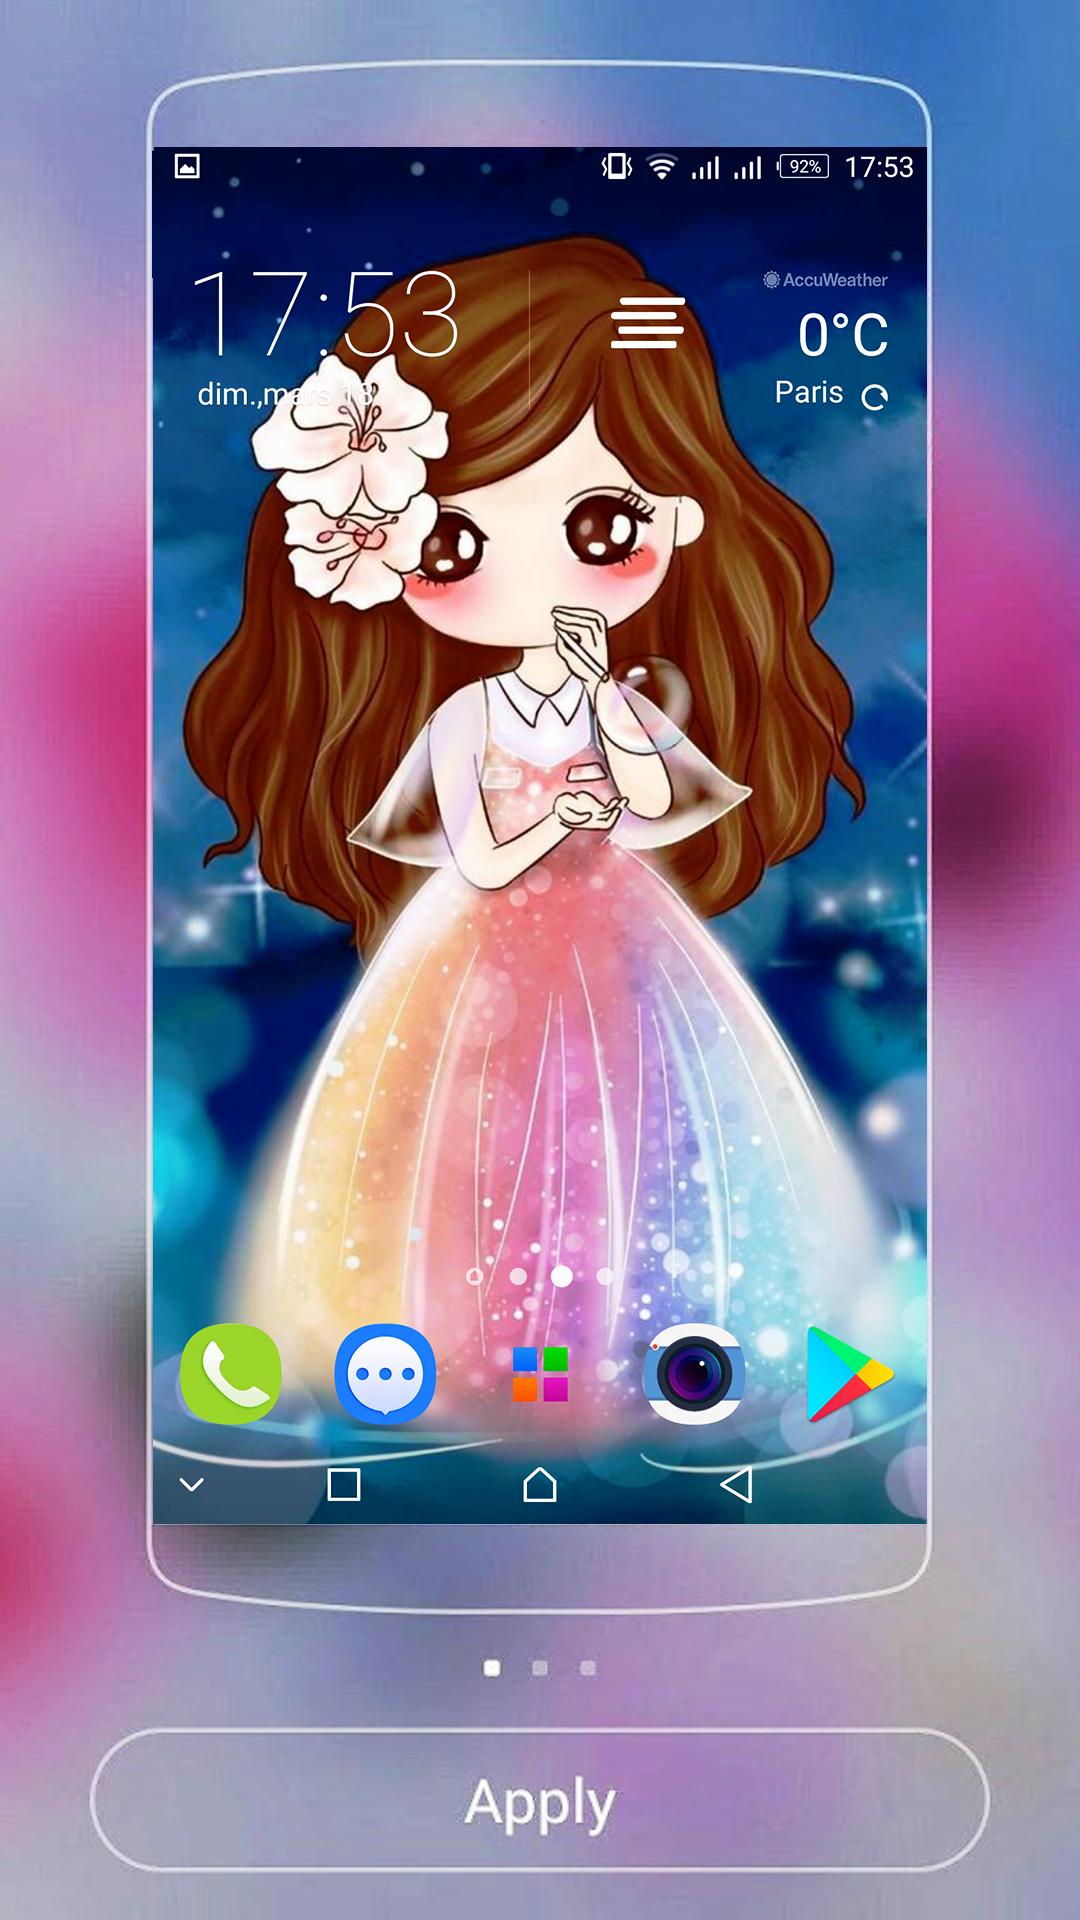 Wallpaper Imut For Android APK Download